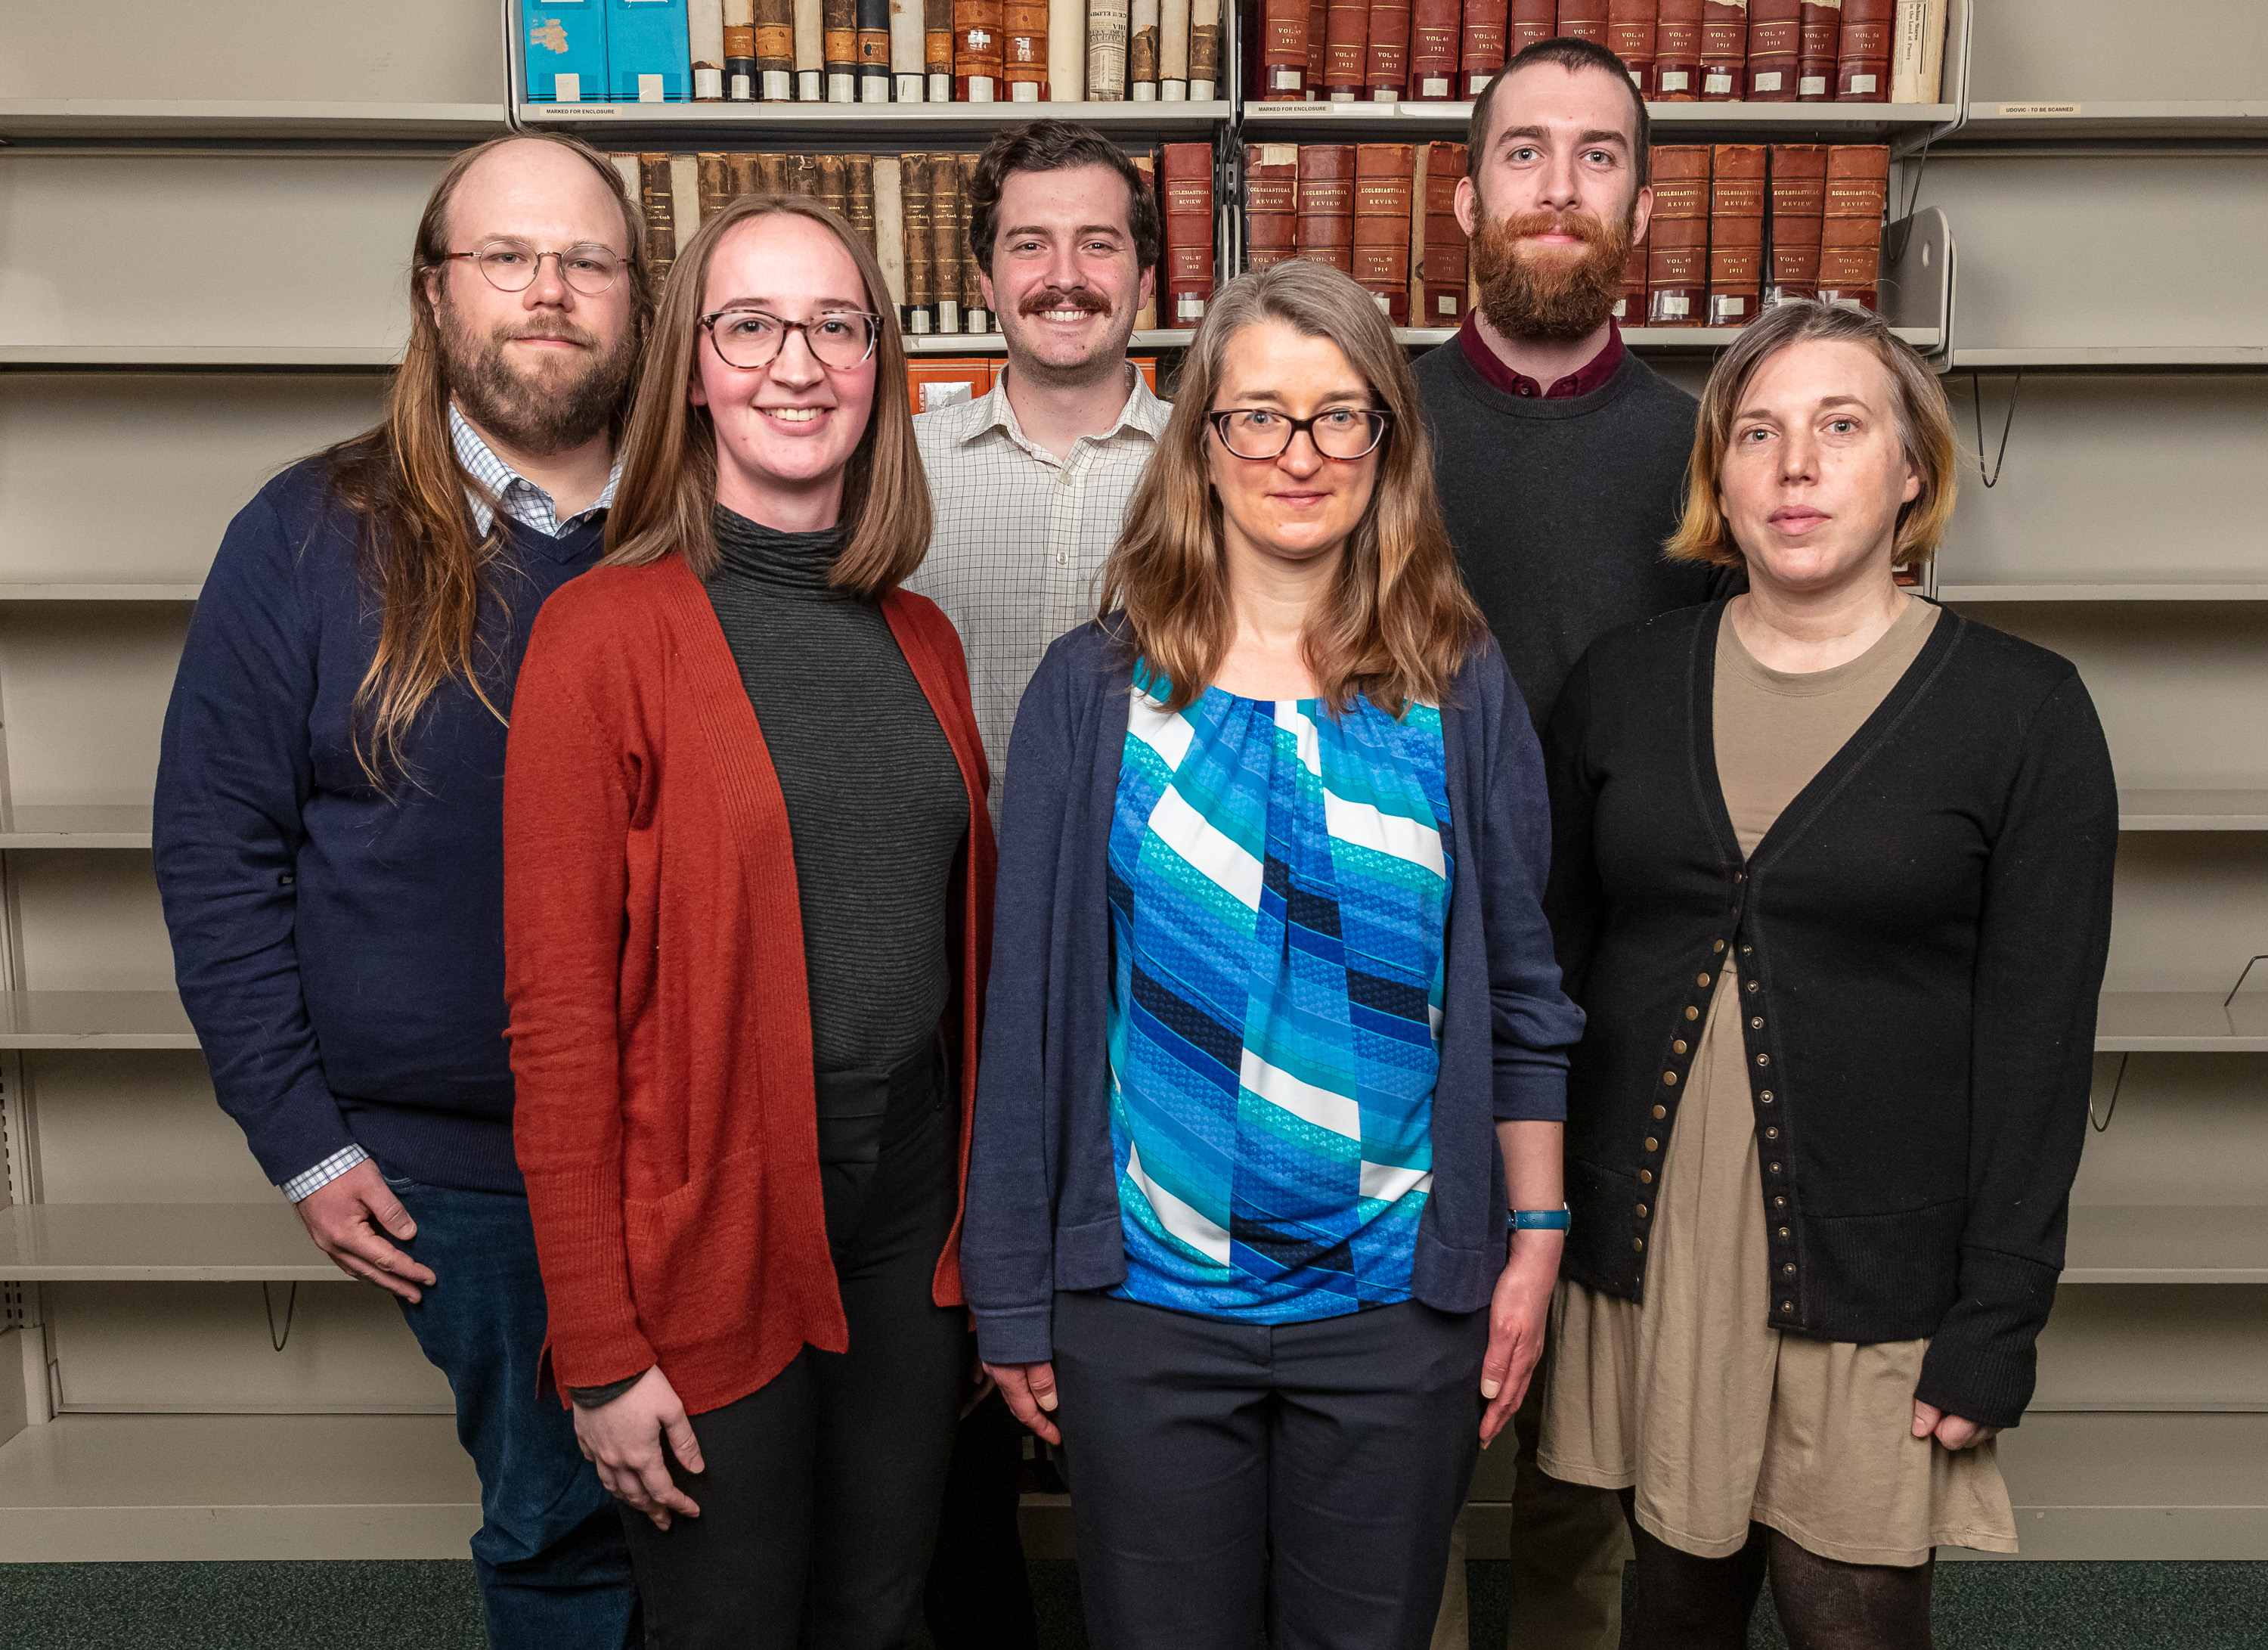 (Back row, left to right) David Sievers, Kyle Scheuring, Alec Munhall, (front row, left to right) Abigail Evans, Tami Luedtke and Audra Deemer serve on the library's technical services team. These staff ensure the DePaul community can access electronic resources including 488 research databases; 153,253 online journals; 727,797 ebooks and 212,173 digital media; and find the library’s 487,009 print books through LibrarySearch. Not pictured: Cary Cline, Stacey Reichard, Dorian Rodriguez Spicer and Renata Schneider. (DePaul University/Randall Spriggs)